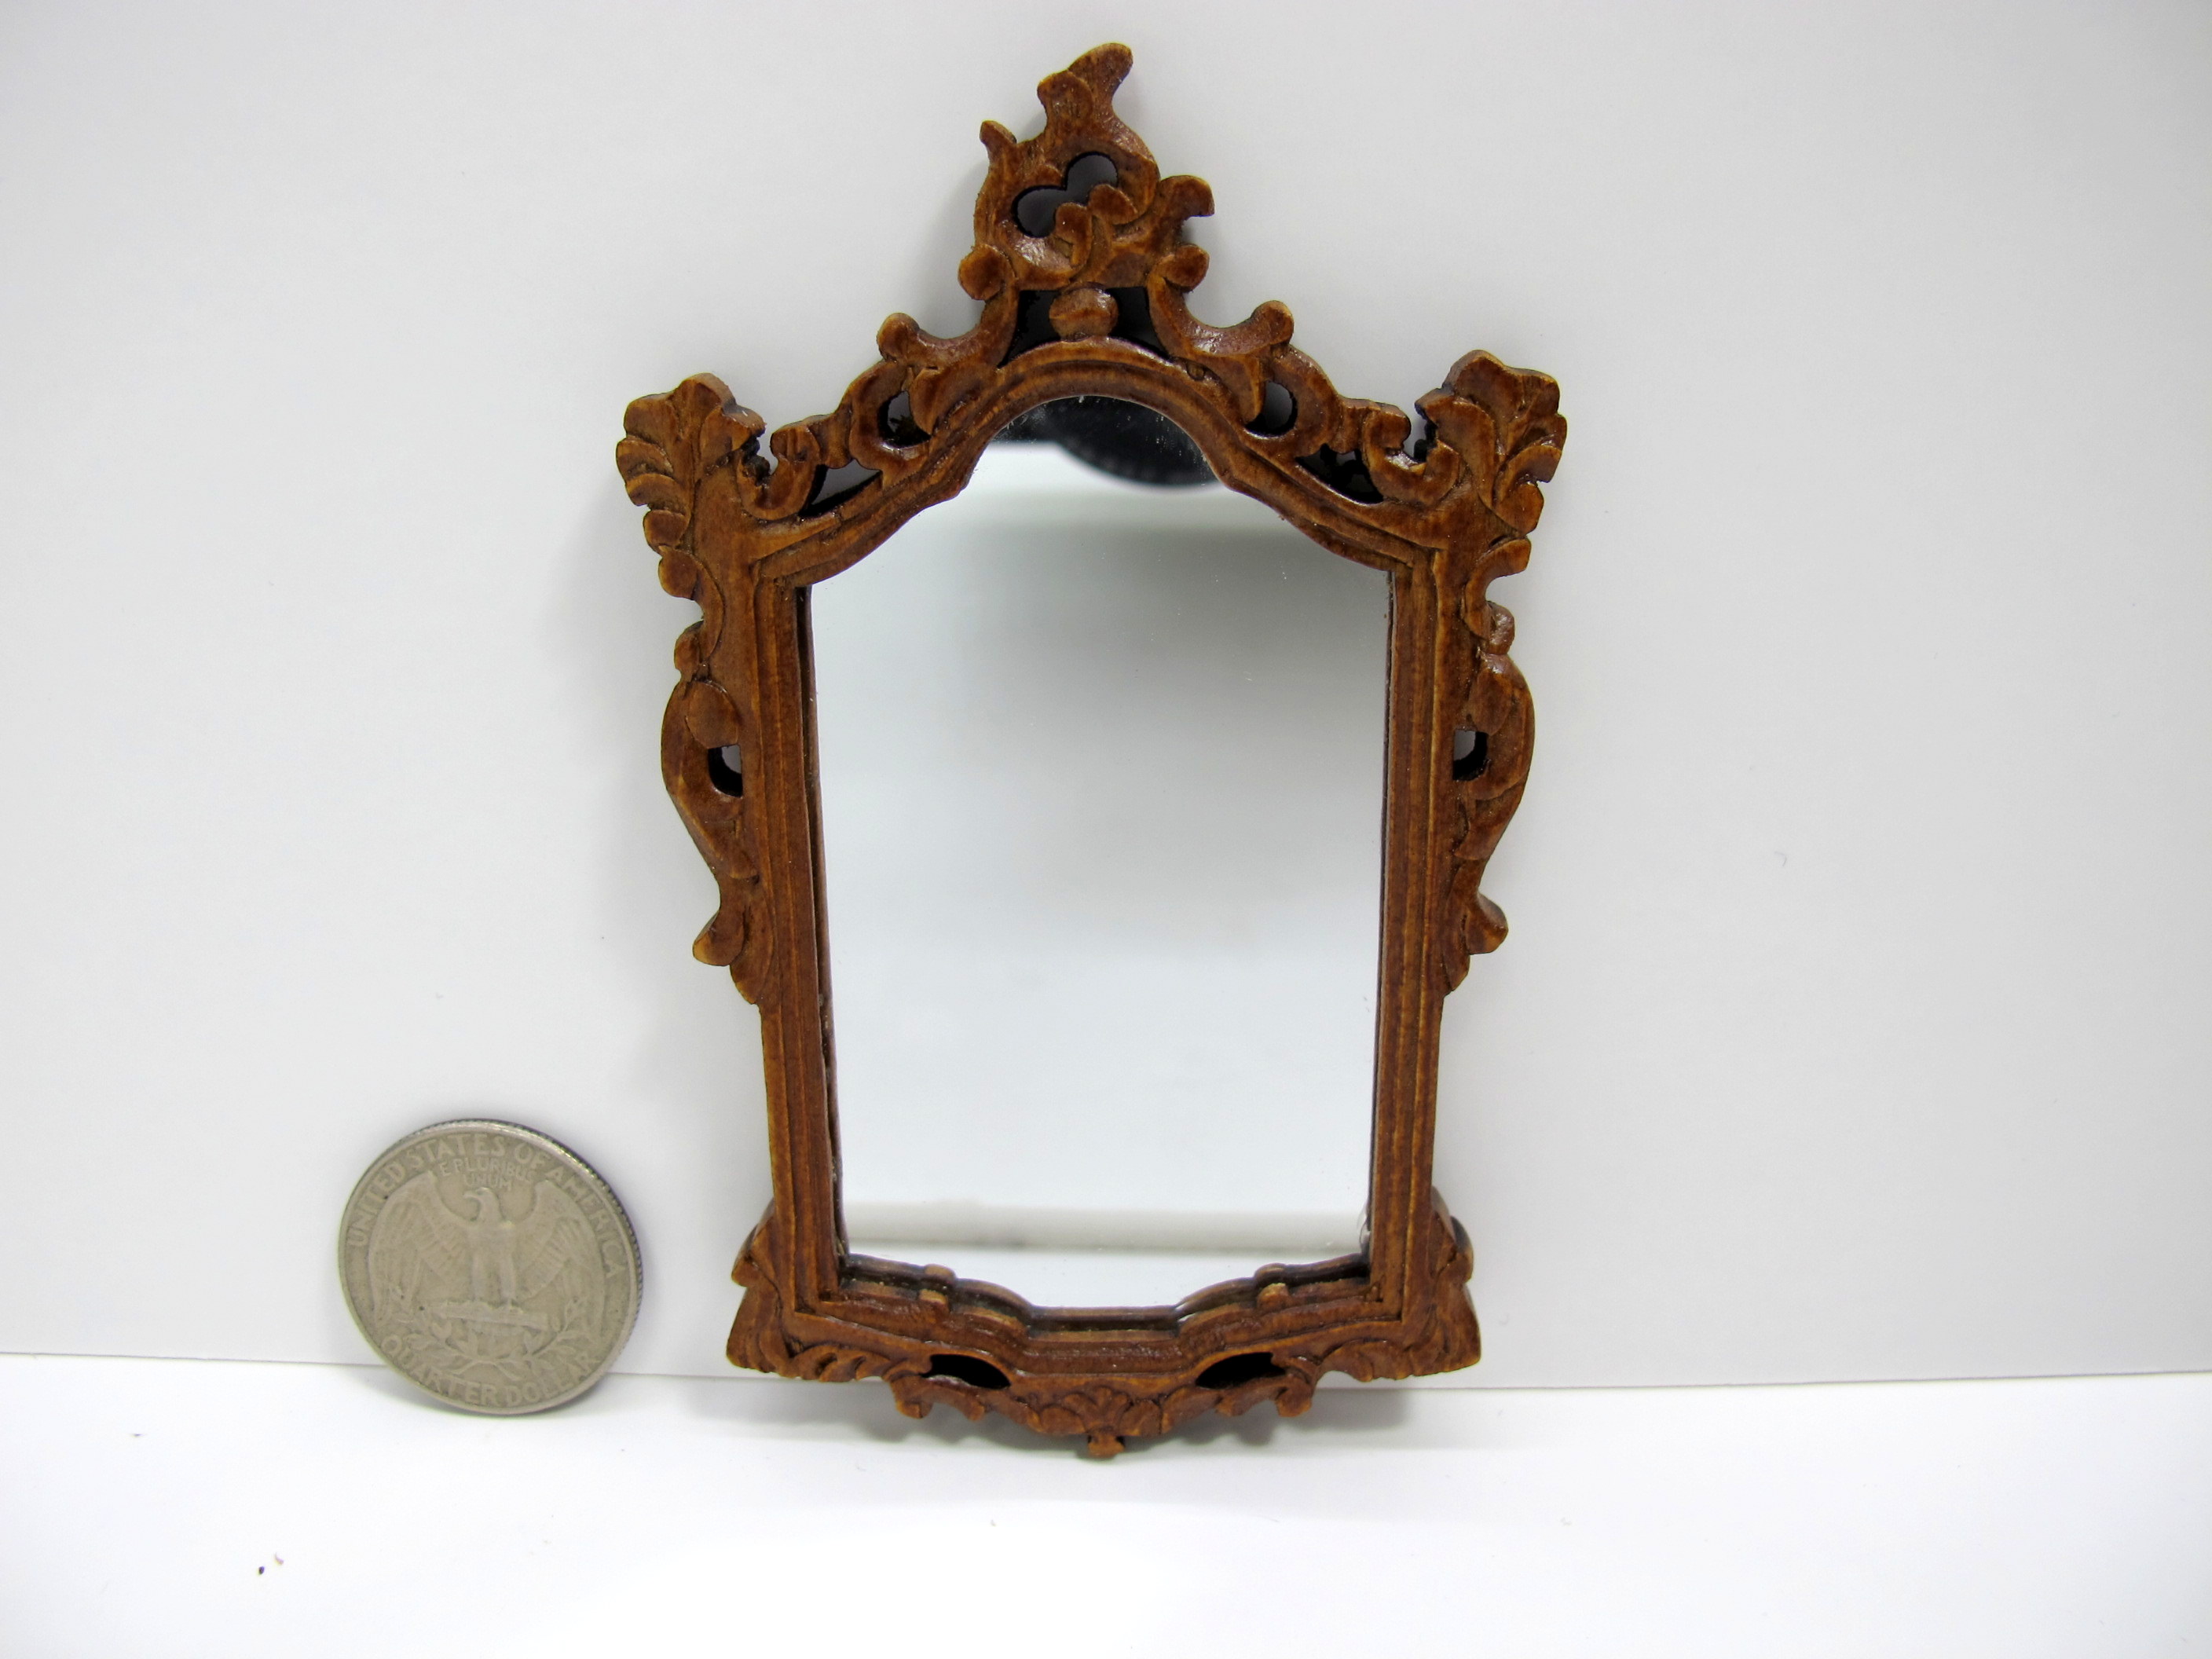 1:12 Scale Miniature Doll House Carved Mirror Finished In Walnut